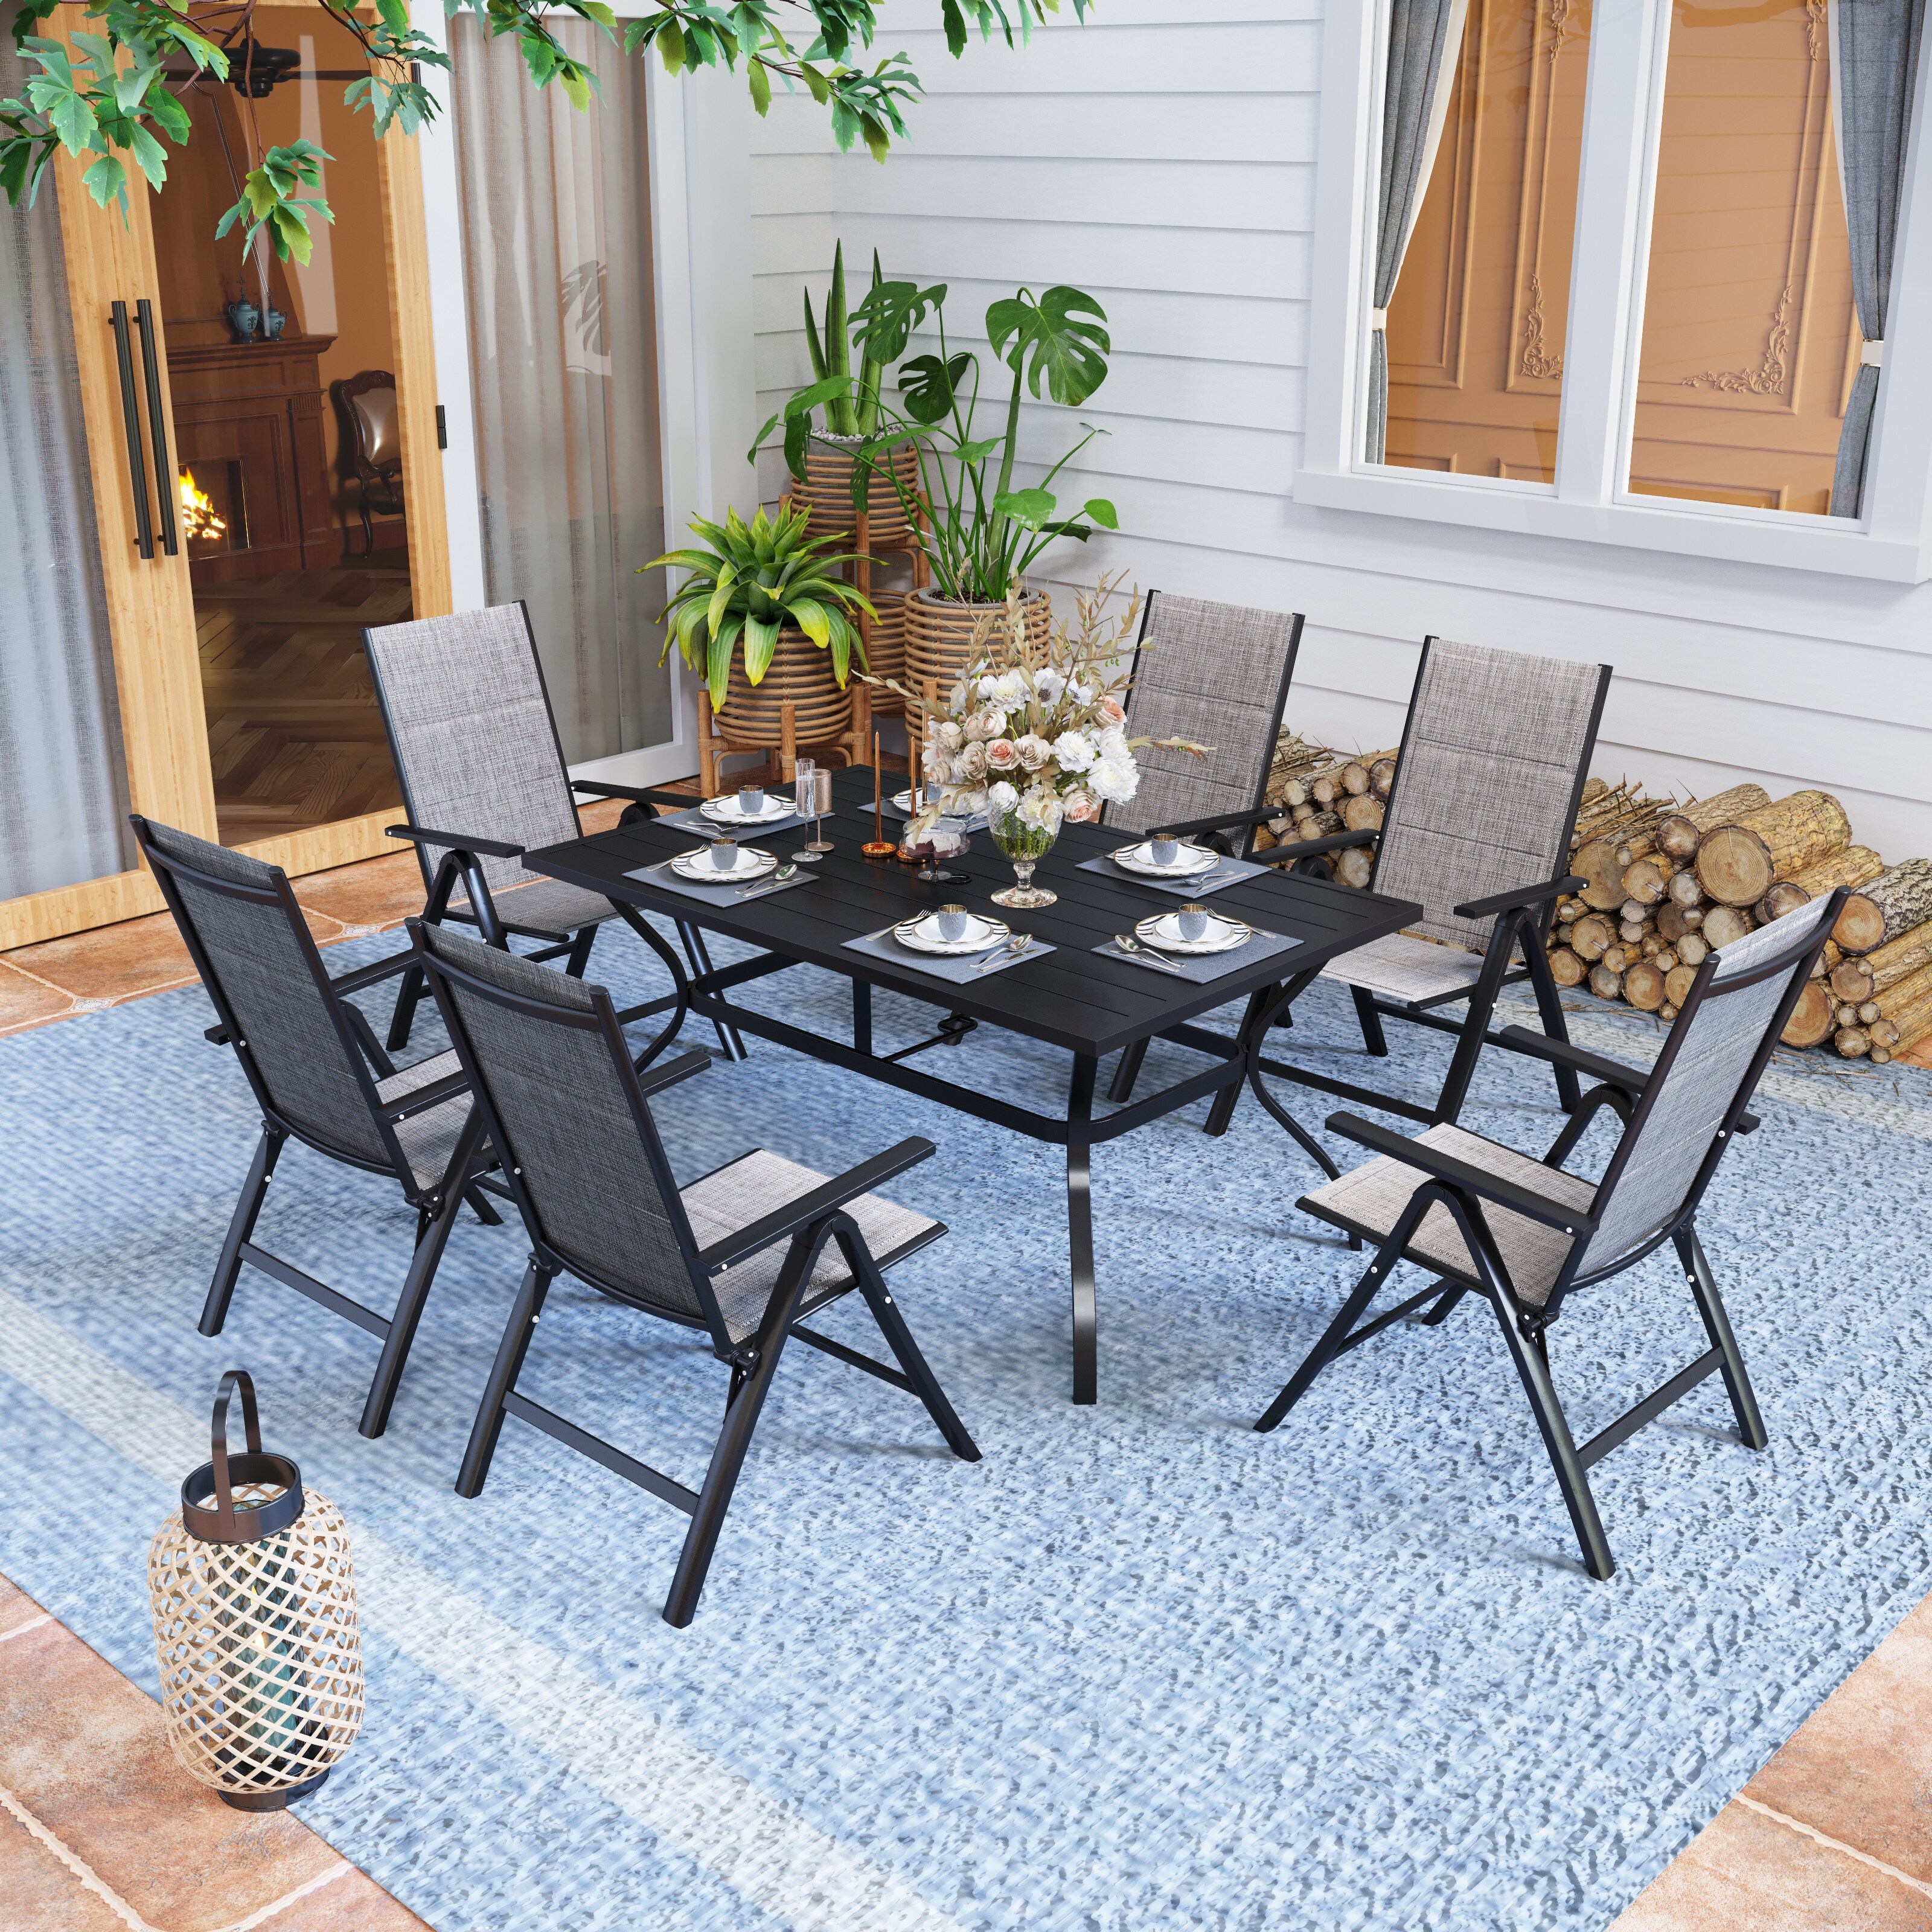 7-piece Patio Dining Set Of Foldable and 7-angle Adjustable Padded Patio Dining Chairs And 3 Kinds Of Patio Tables